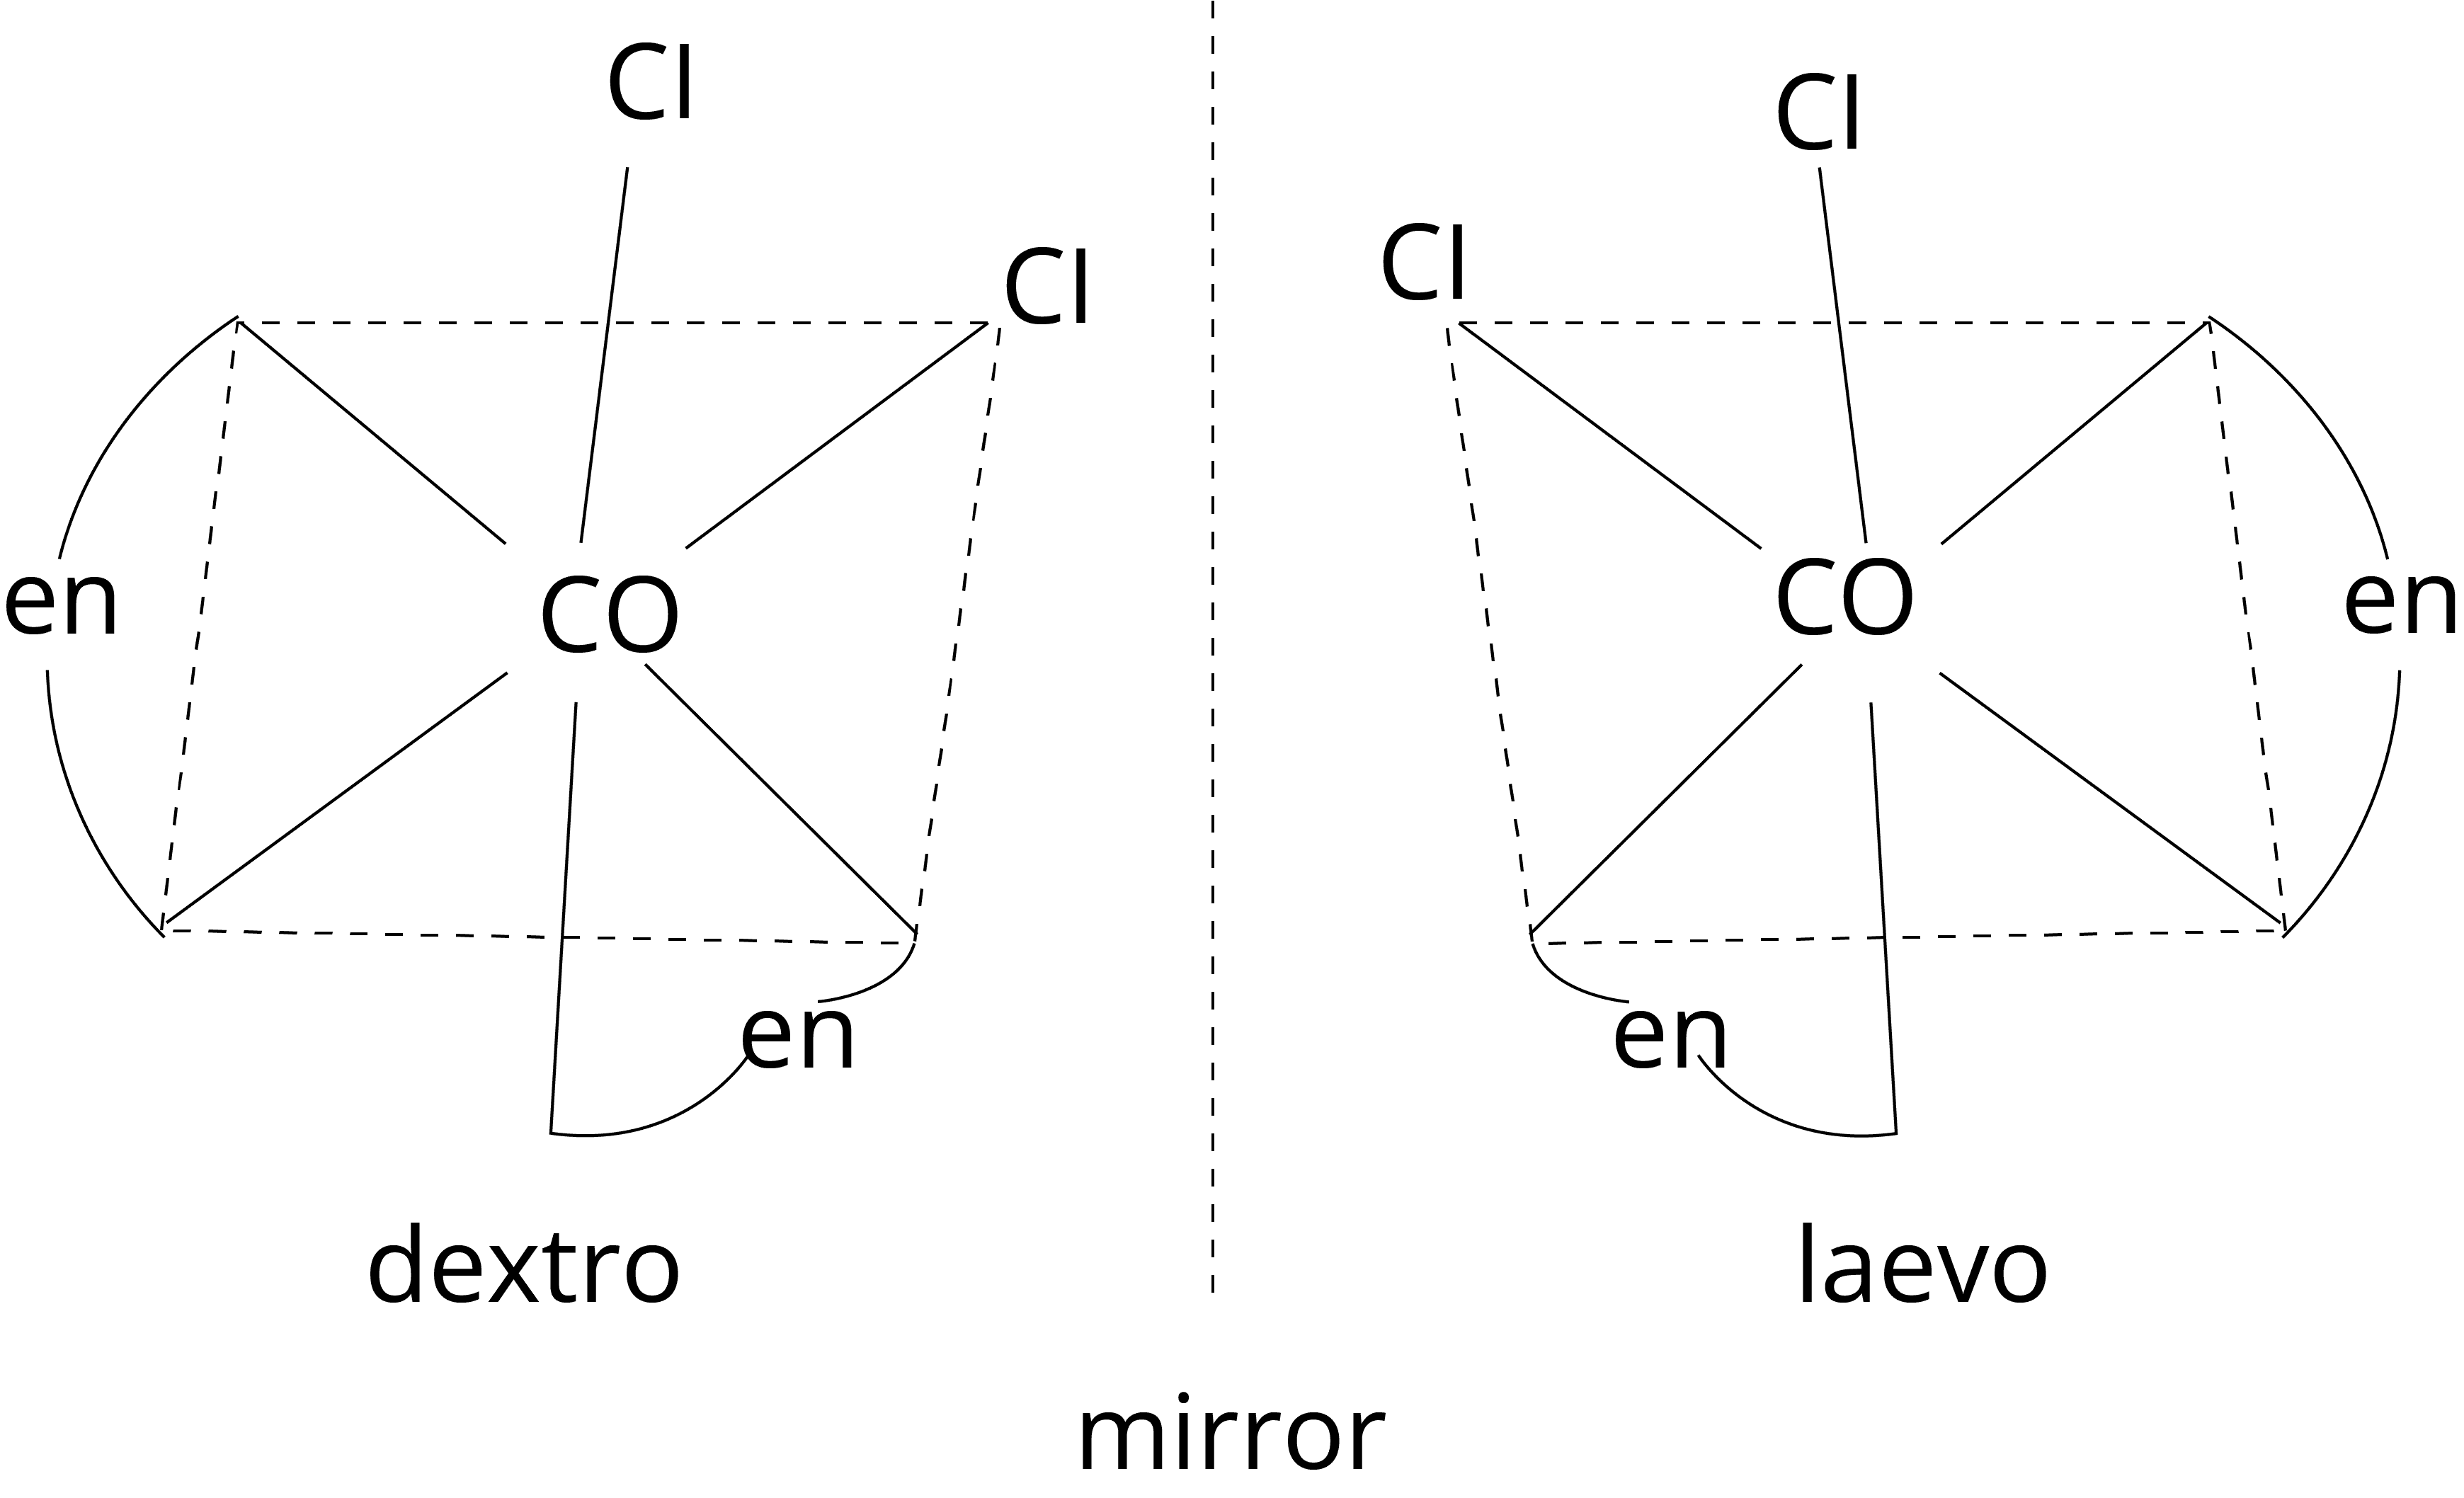 The type of isomerism shown by the complex [CoCl2(en)2] is geometrical isomerism